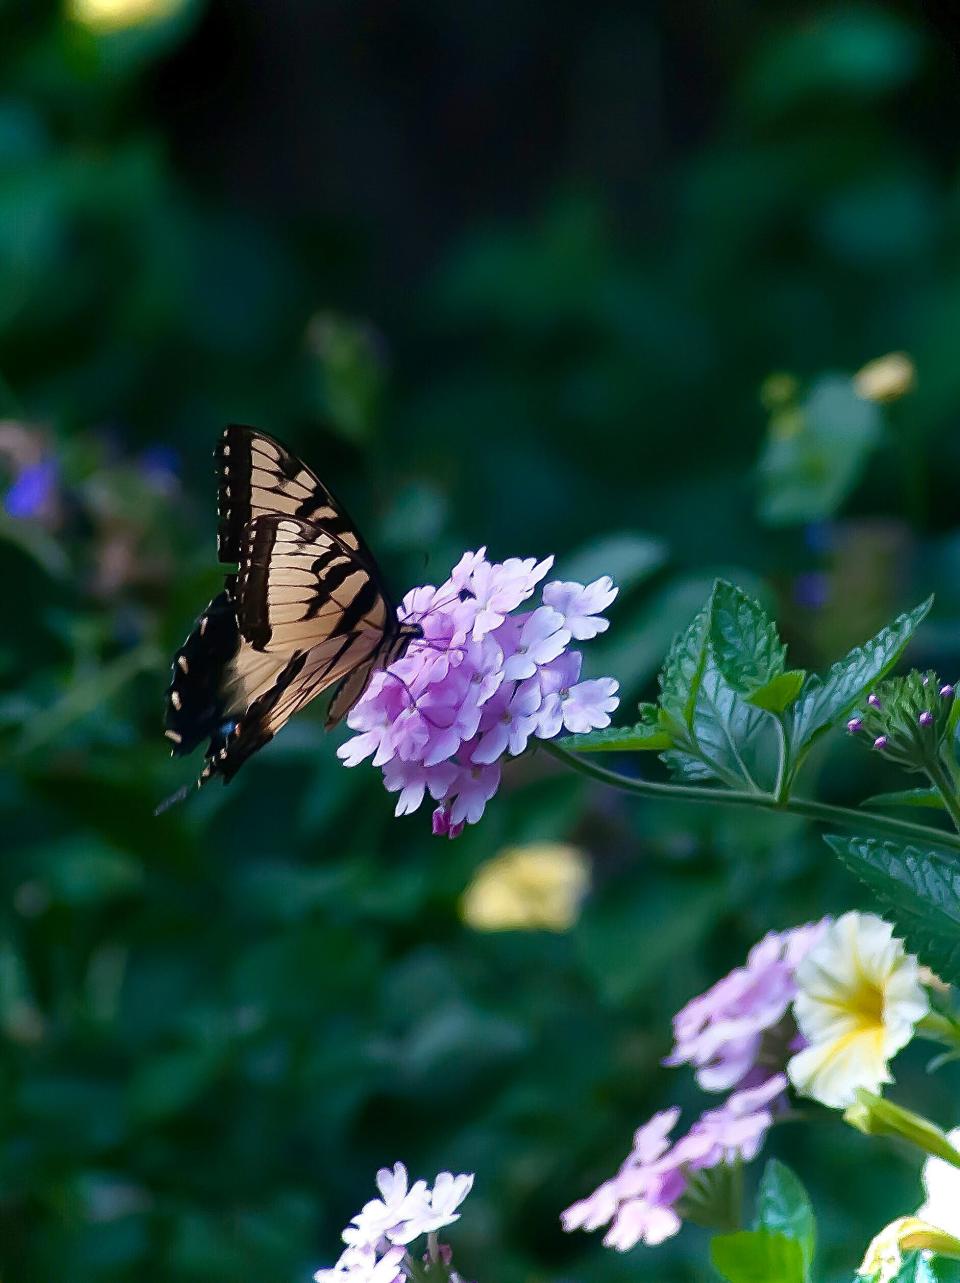 This Eastern Tiger Swallowtail has found the Superbena Pink Cashmere verbena to be the perfect nectaring spot.